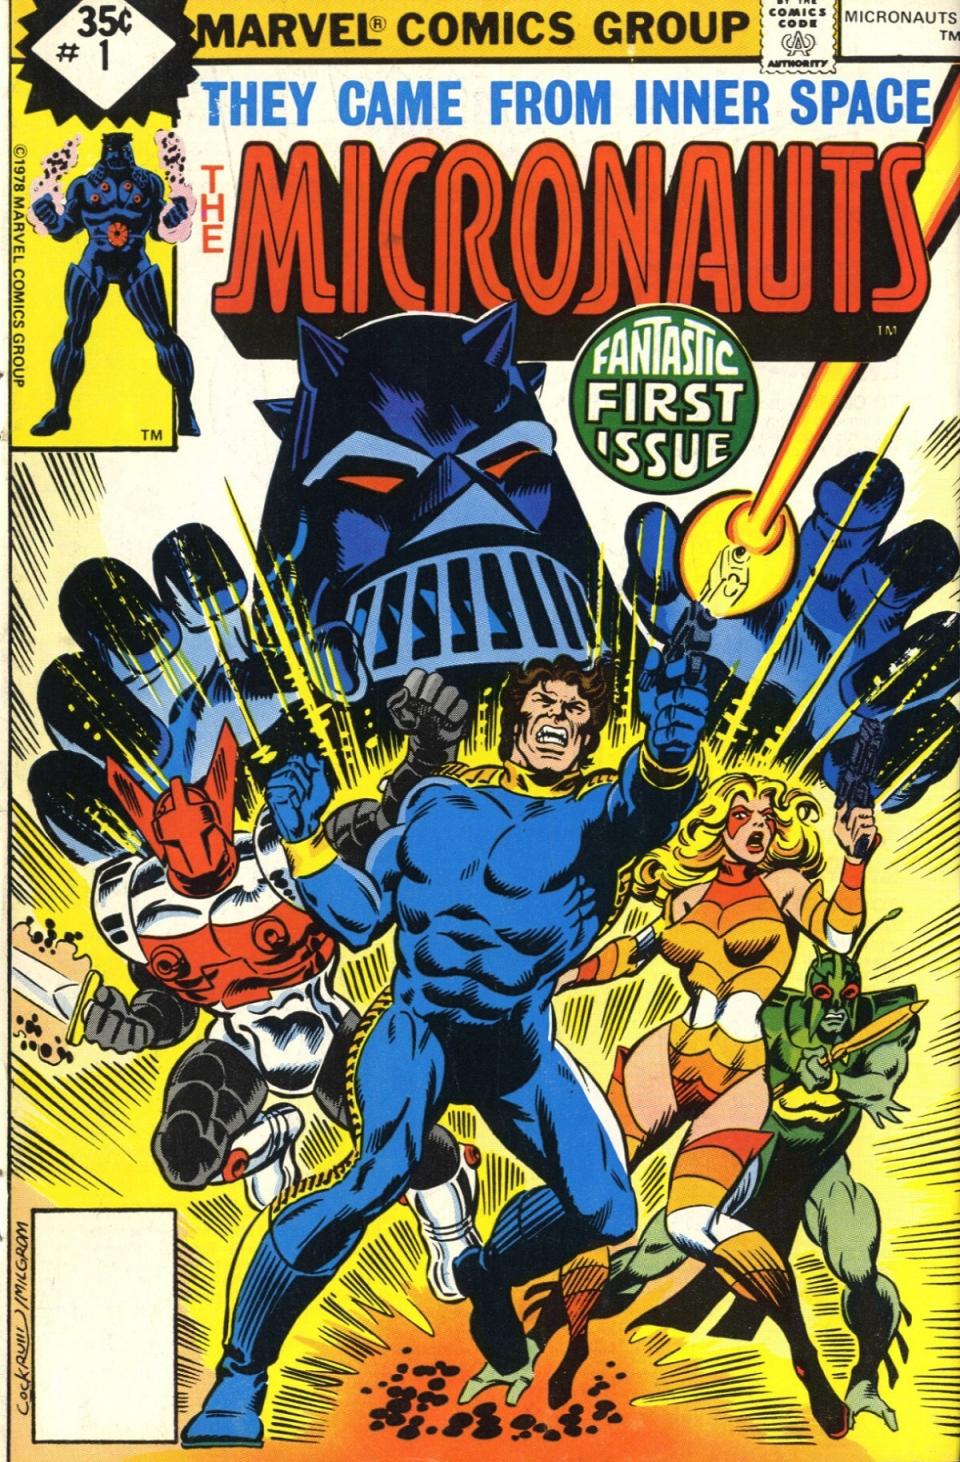 Micronauts #1 from Marvel Comics in 1979,